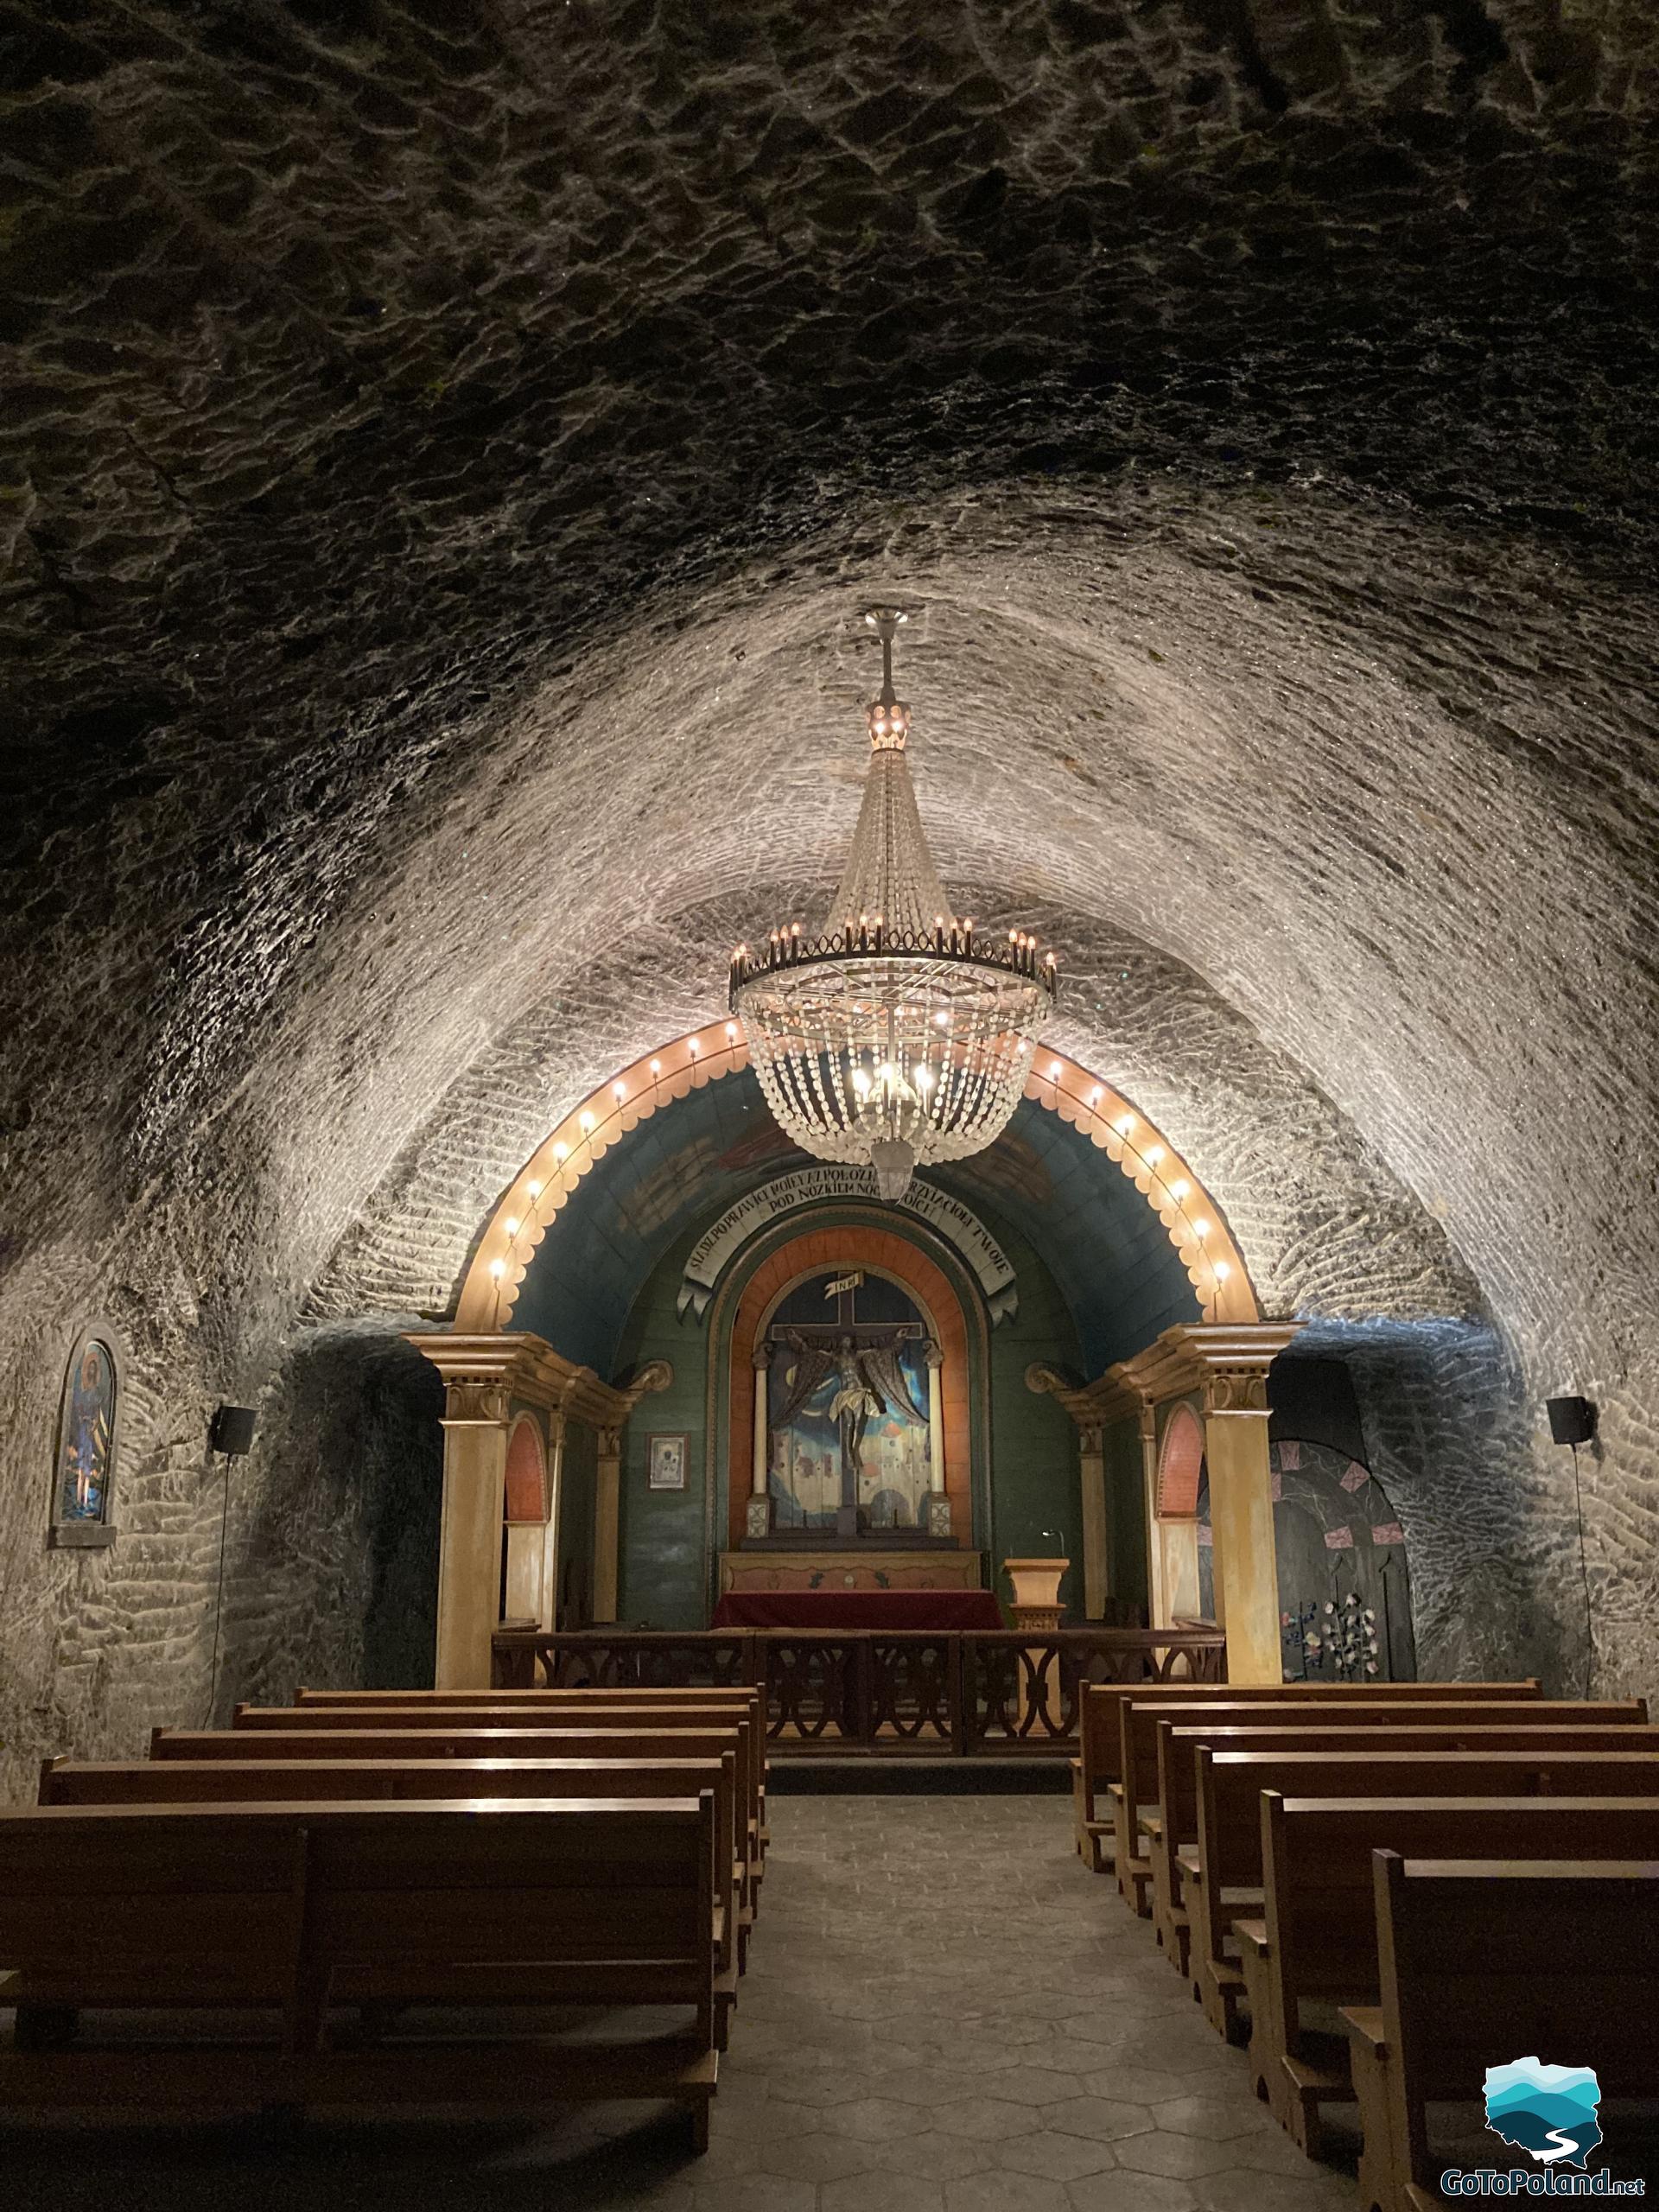 a small chamber carved in salt, served as a chapel, there are two rows of wooden pews, small altar and one chandelier